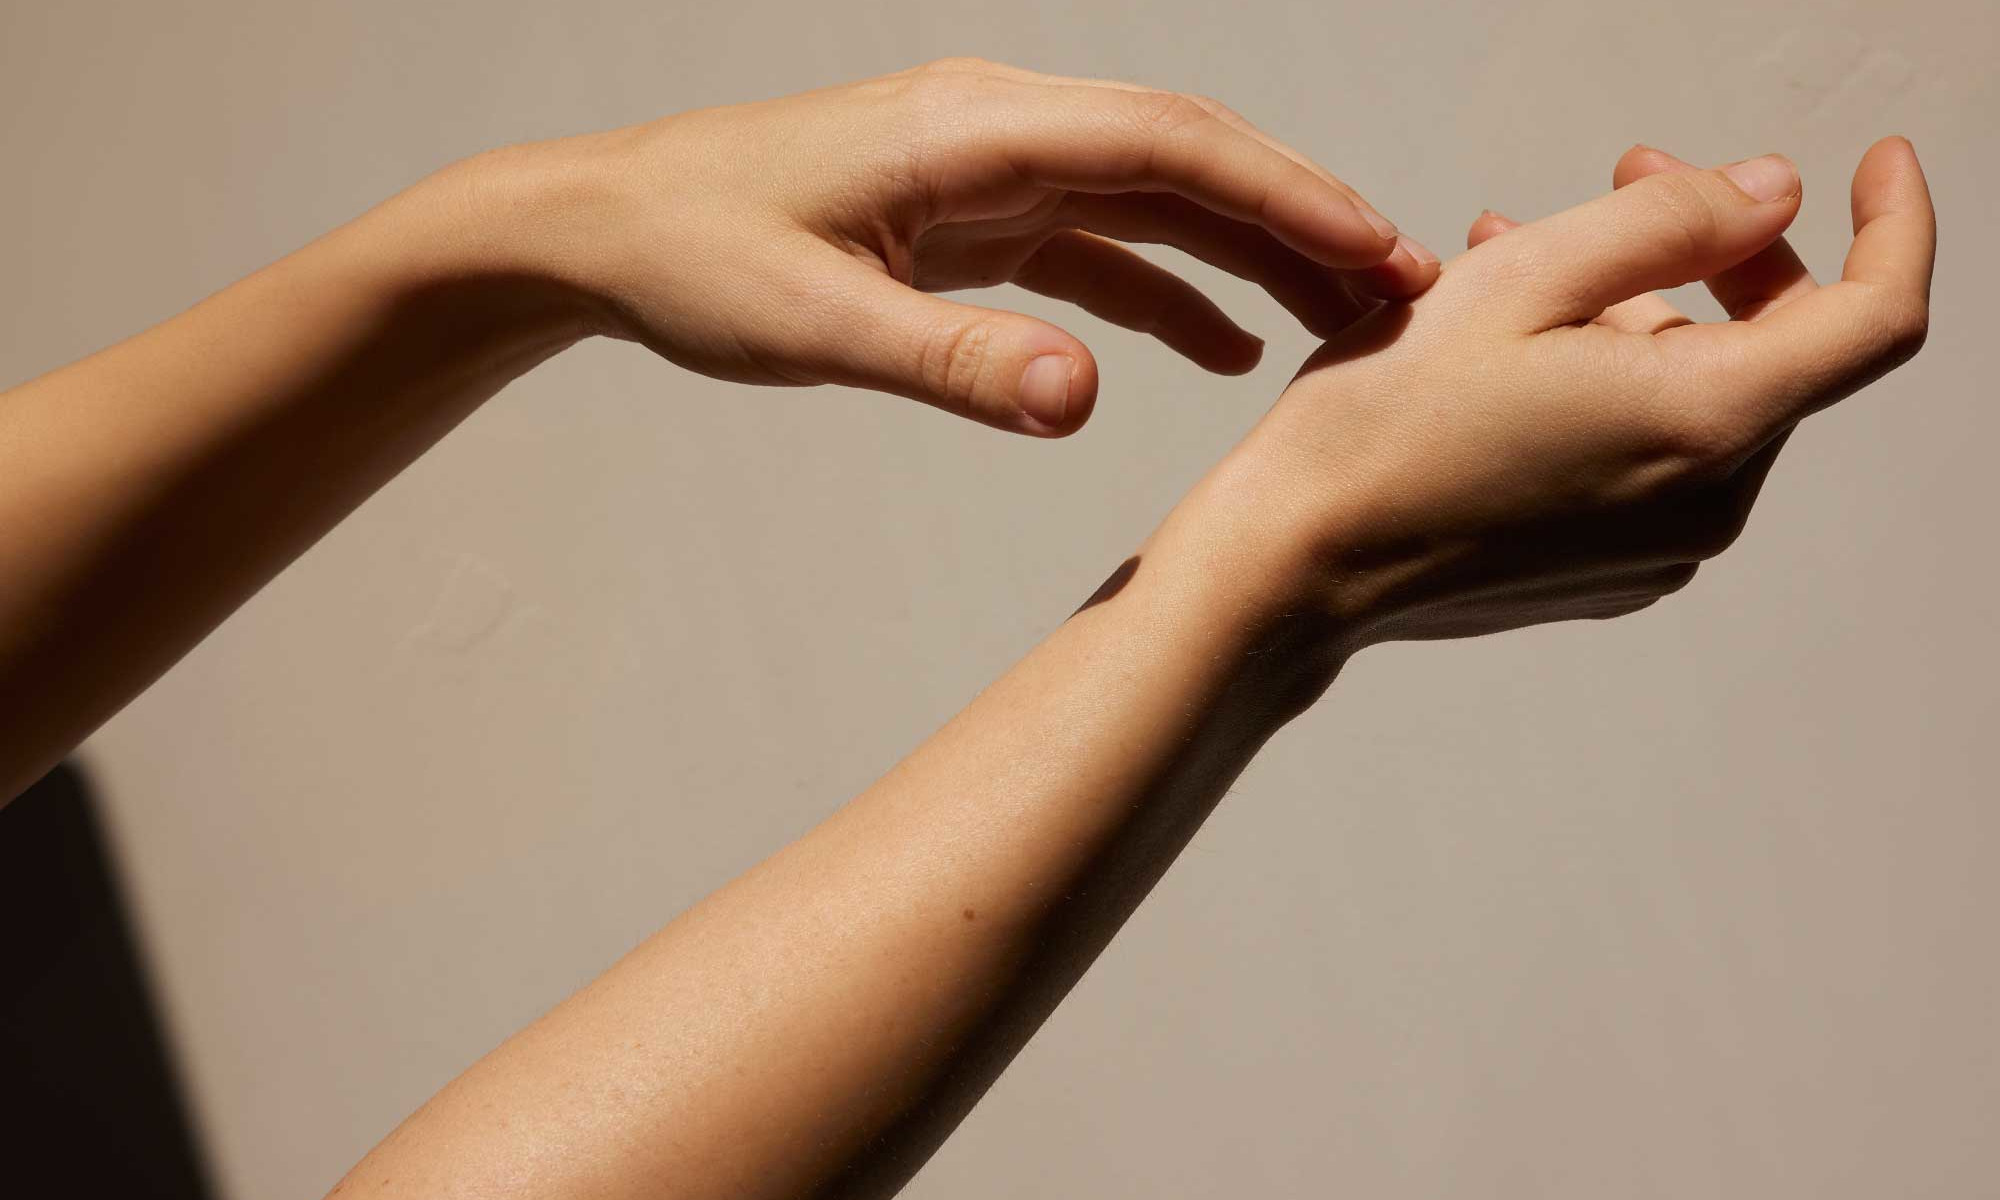 Save Your Hands From Dark Spots & Fine Lines With This Simple Hand Cream Hack